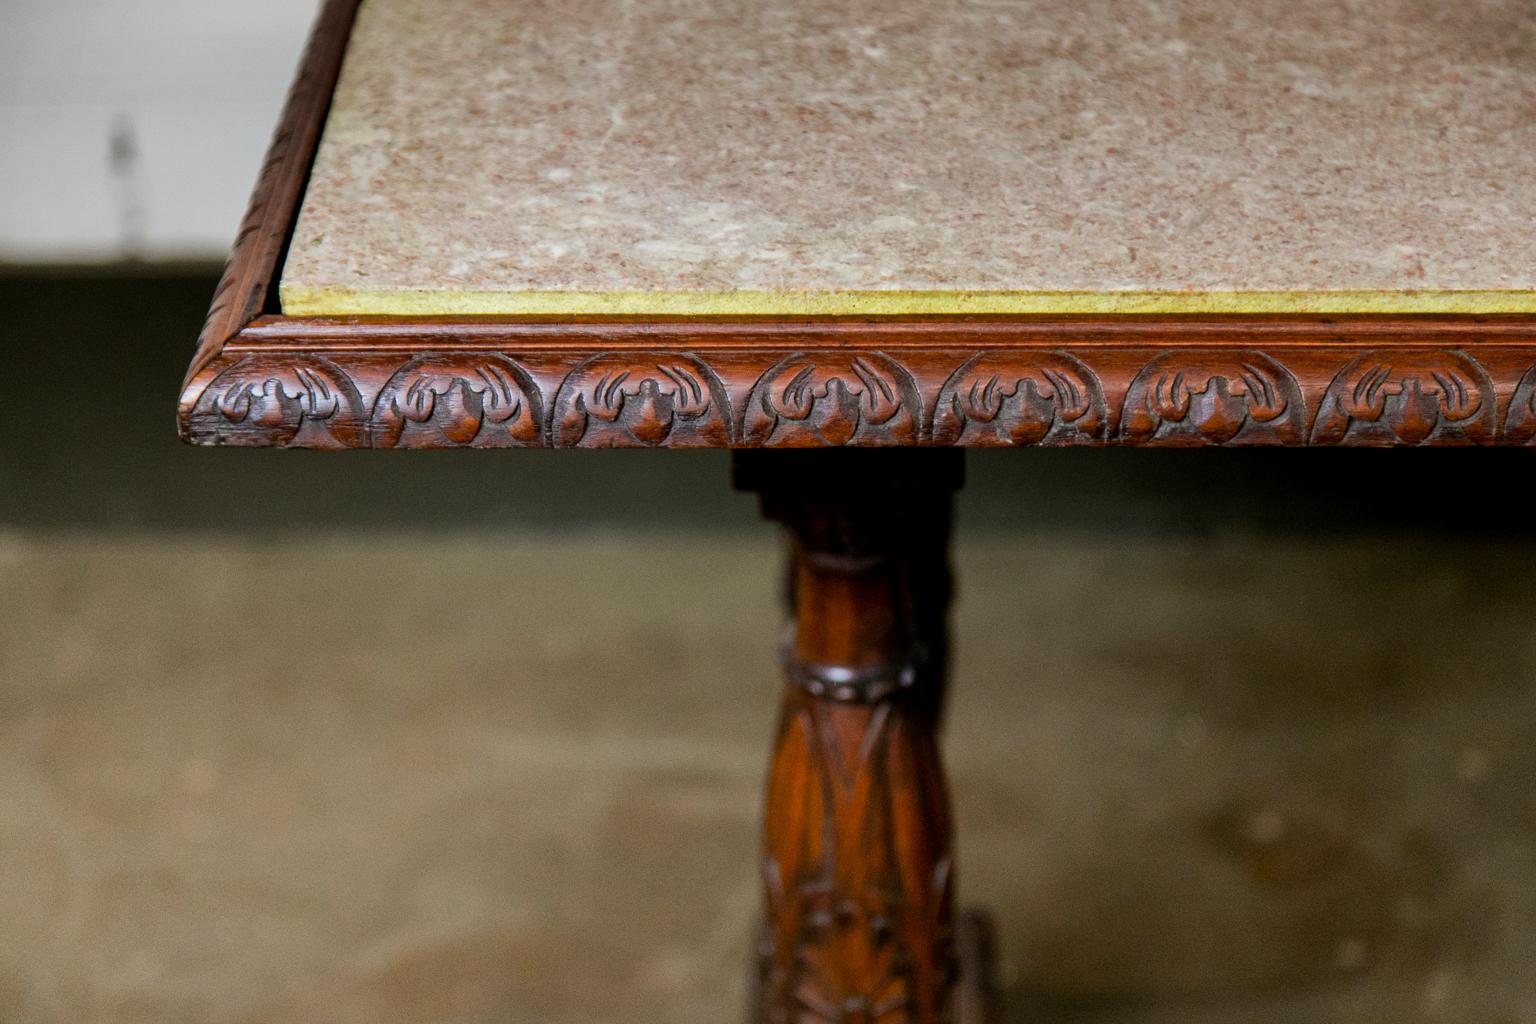 The top edge of this center table has a carved and molded shape. The base has four support columns that have carved fluting and floral medallions. The side apron has a carved plume with a stylized pineapple pendant below. The columns end in a